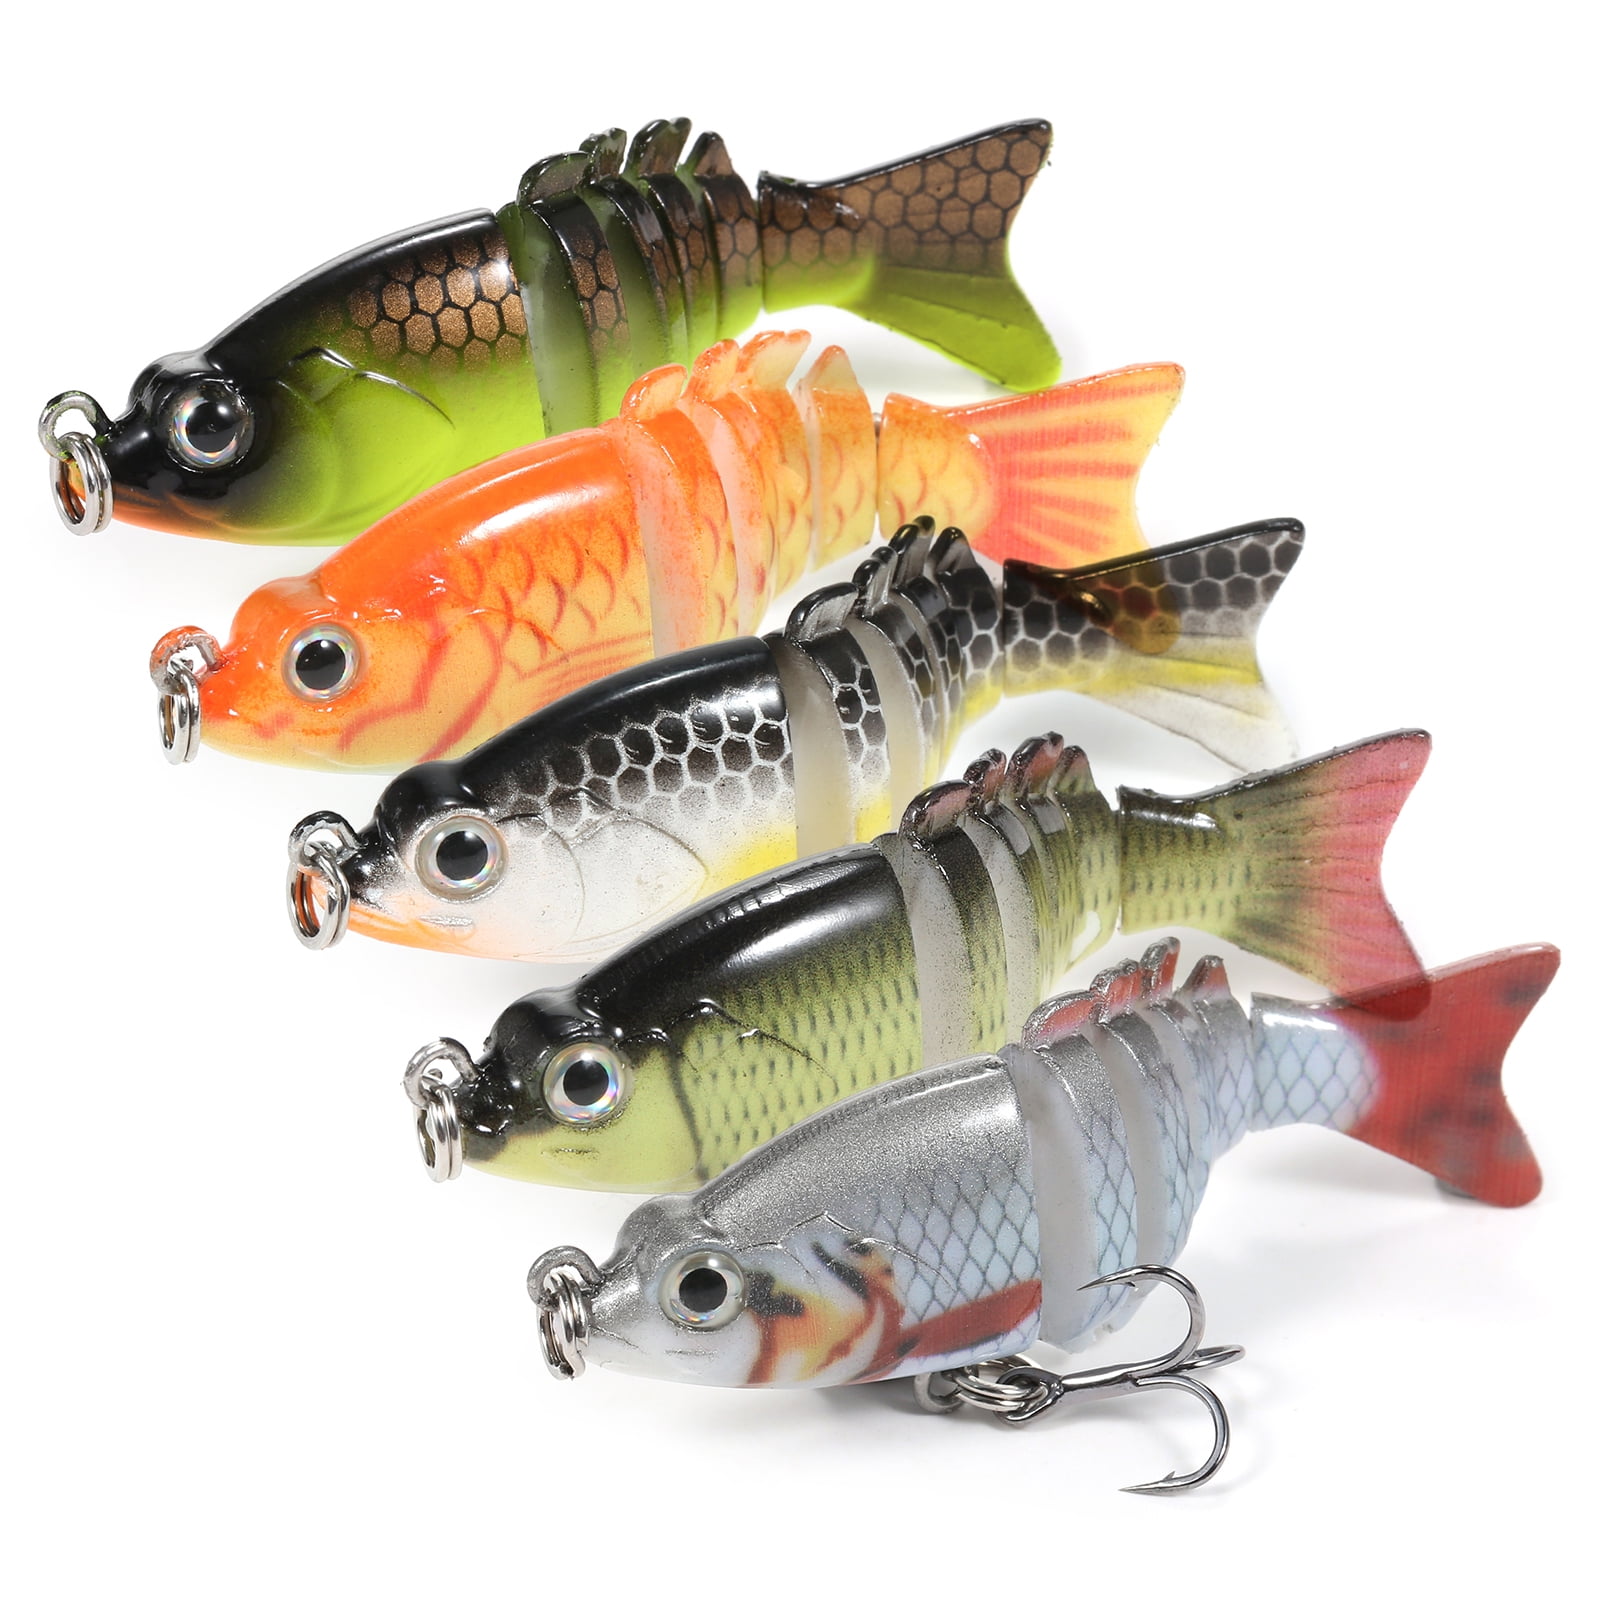 MIXFEER 5PCS Fishing Lures 6cm 15g Mini Wobbler Fishing Lure Artificial  Hard Bait Crankbait with Tackle Box for Fish Bass Fishing Tackle 